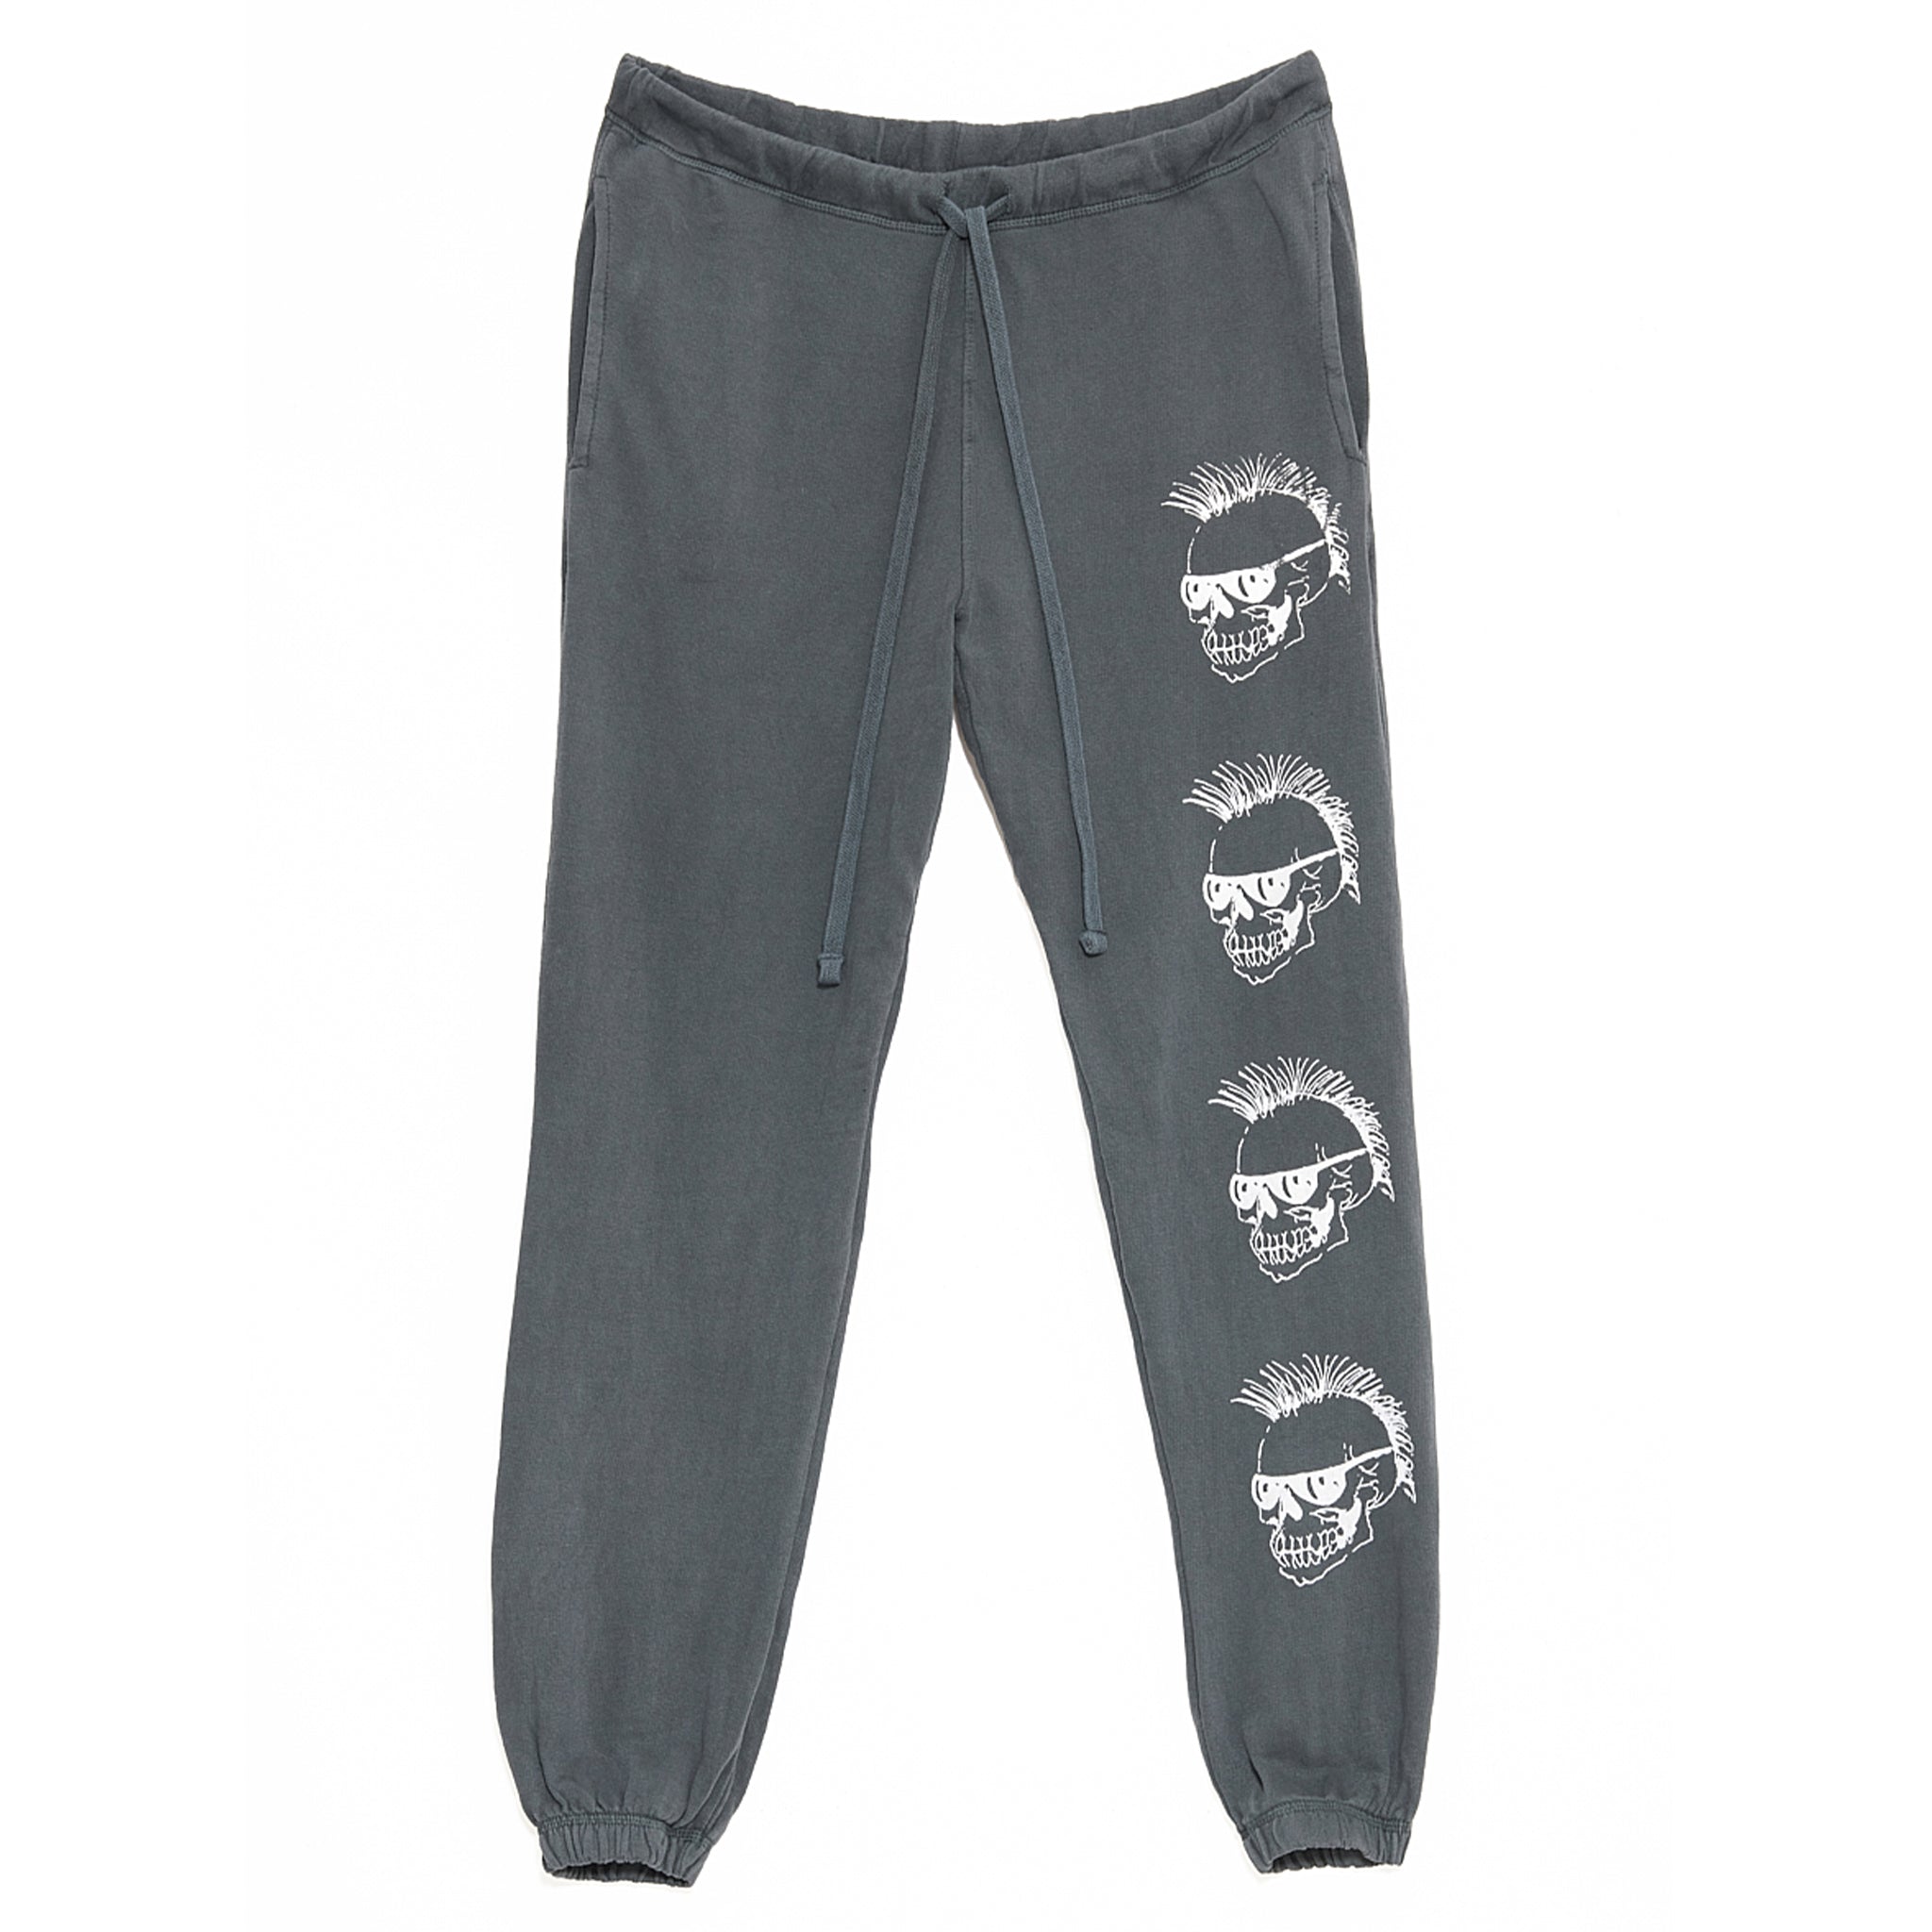 Is That The New Grunge Punk Skull Graphic Sweatpants ??  Graphic sweatpants,  Edgy outfits, Fashion inspo outfits